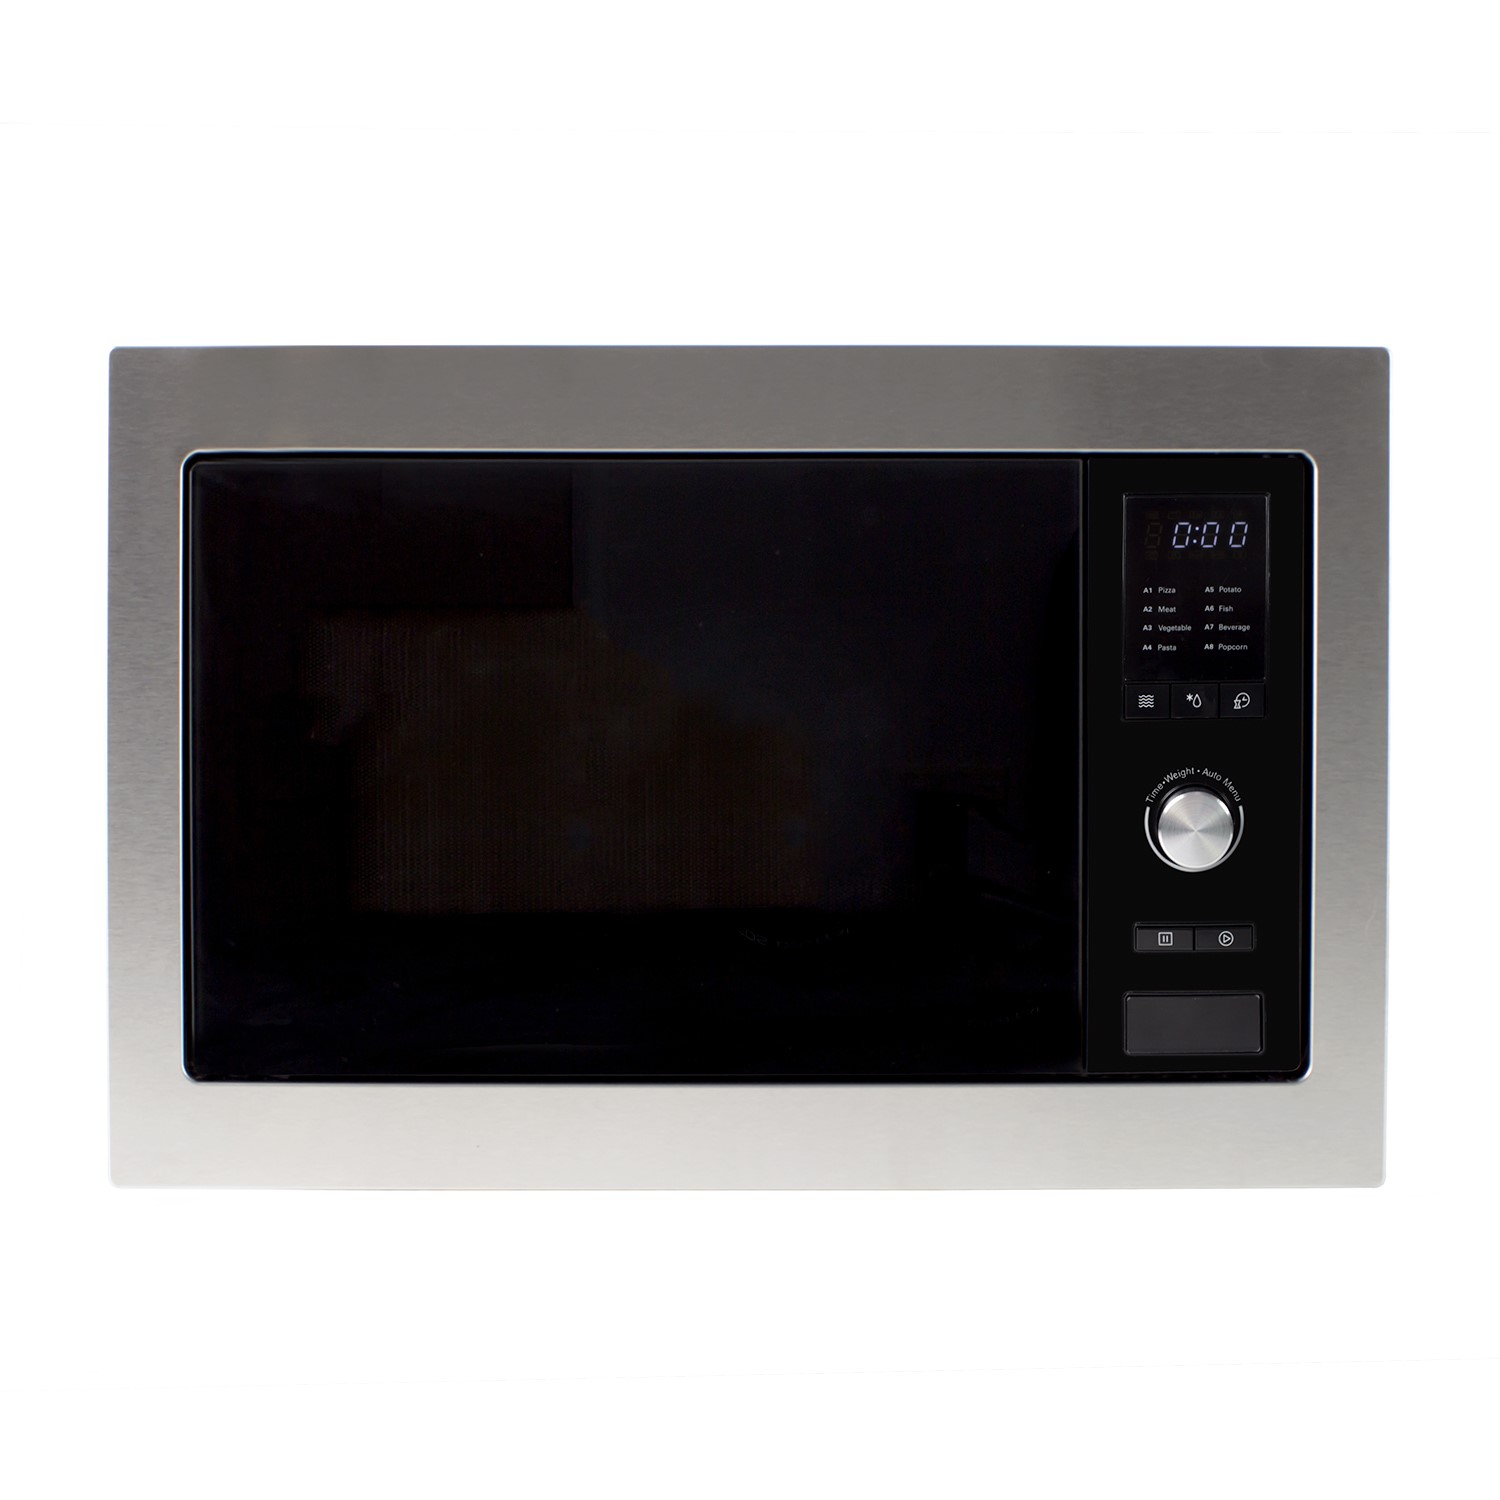 Photos - Other for Computer Electriq Built-In Microwave - Stainless Steel AG925B8Z 